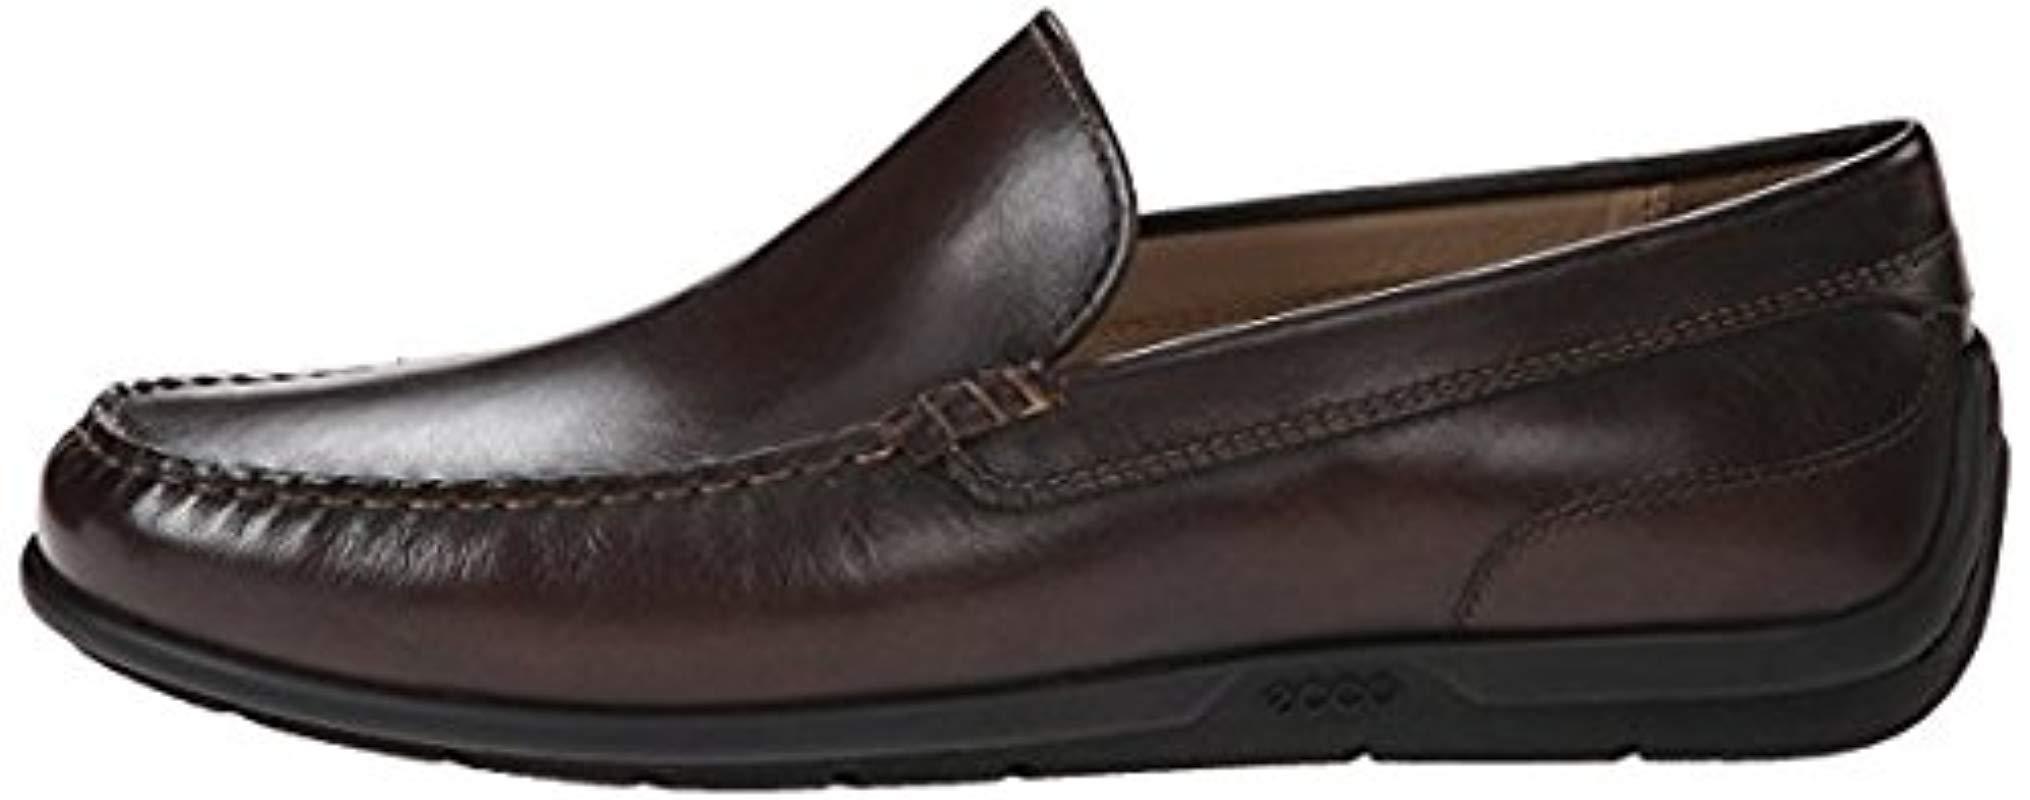  www lyst com shoes ecco classic moc 20 slip on loafer 1 